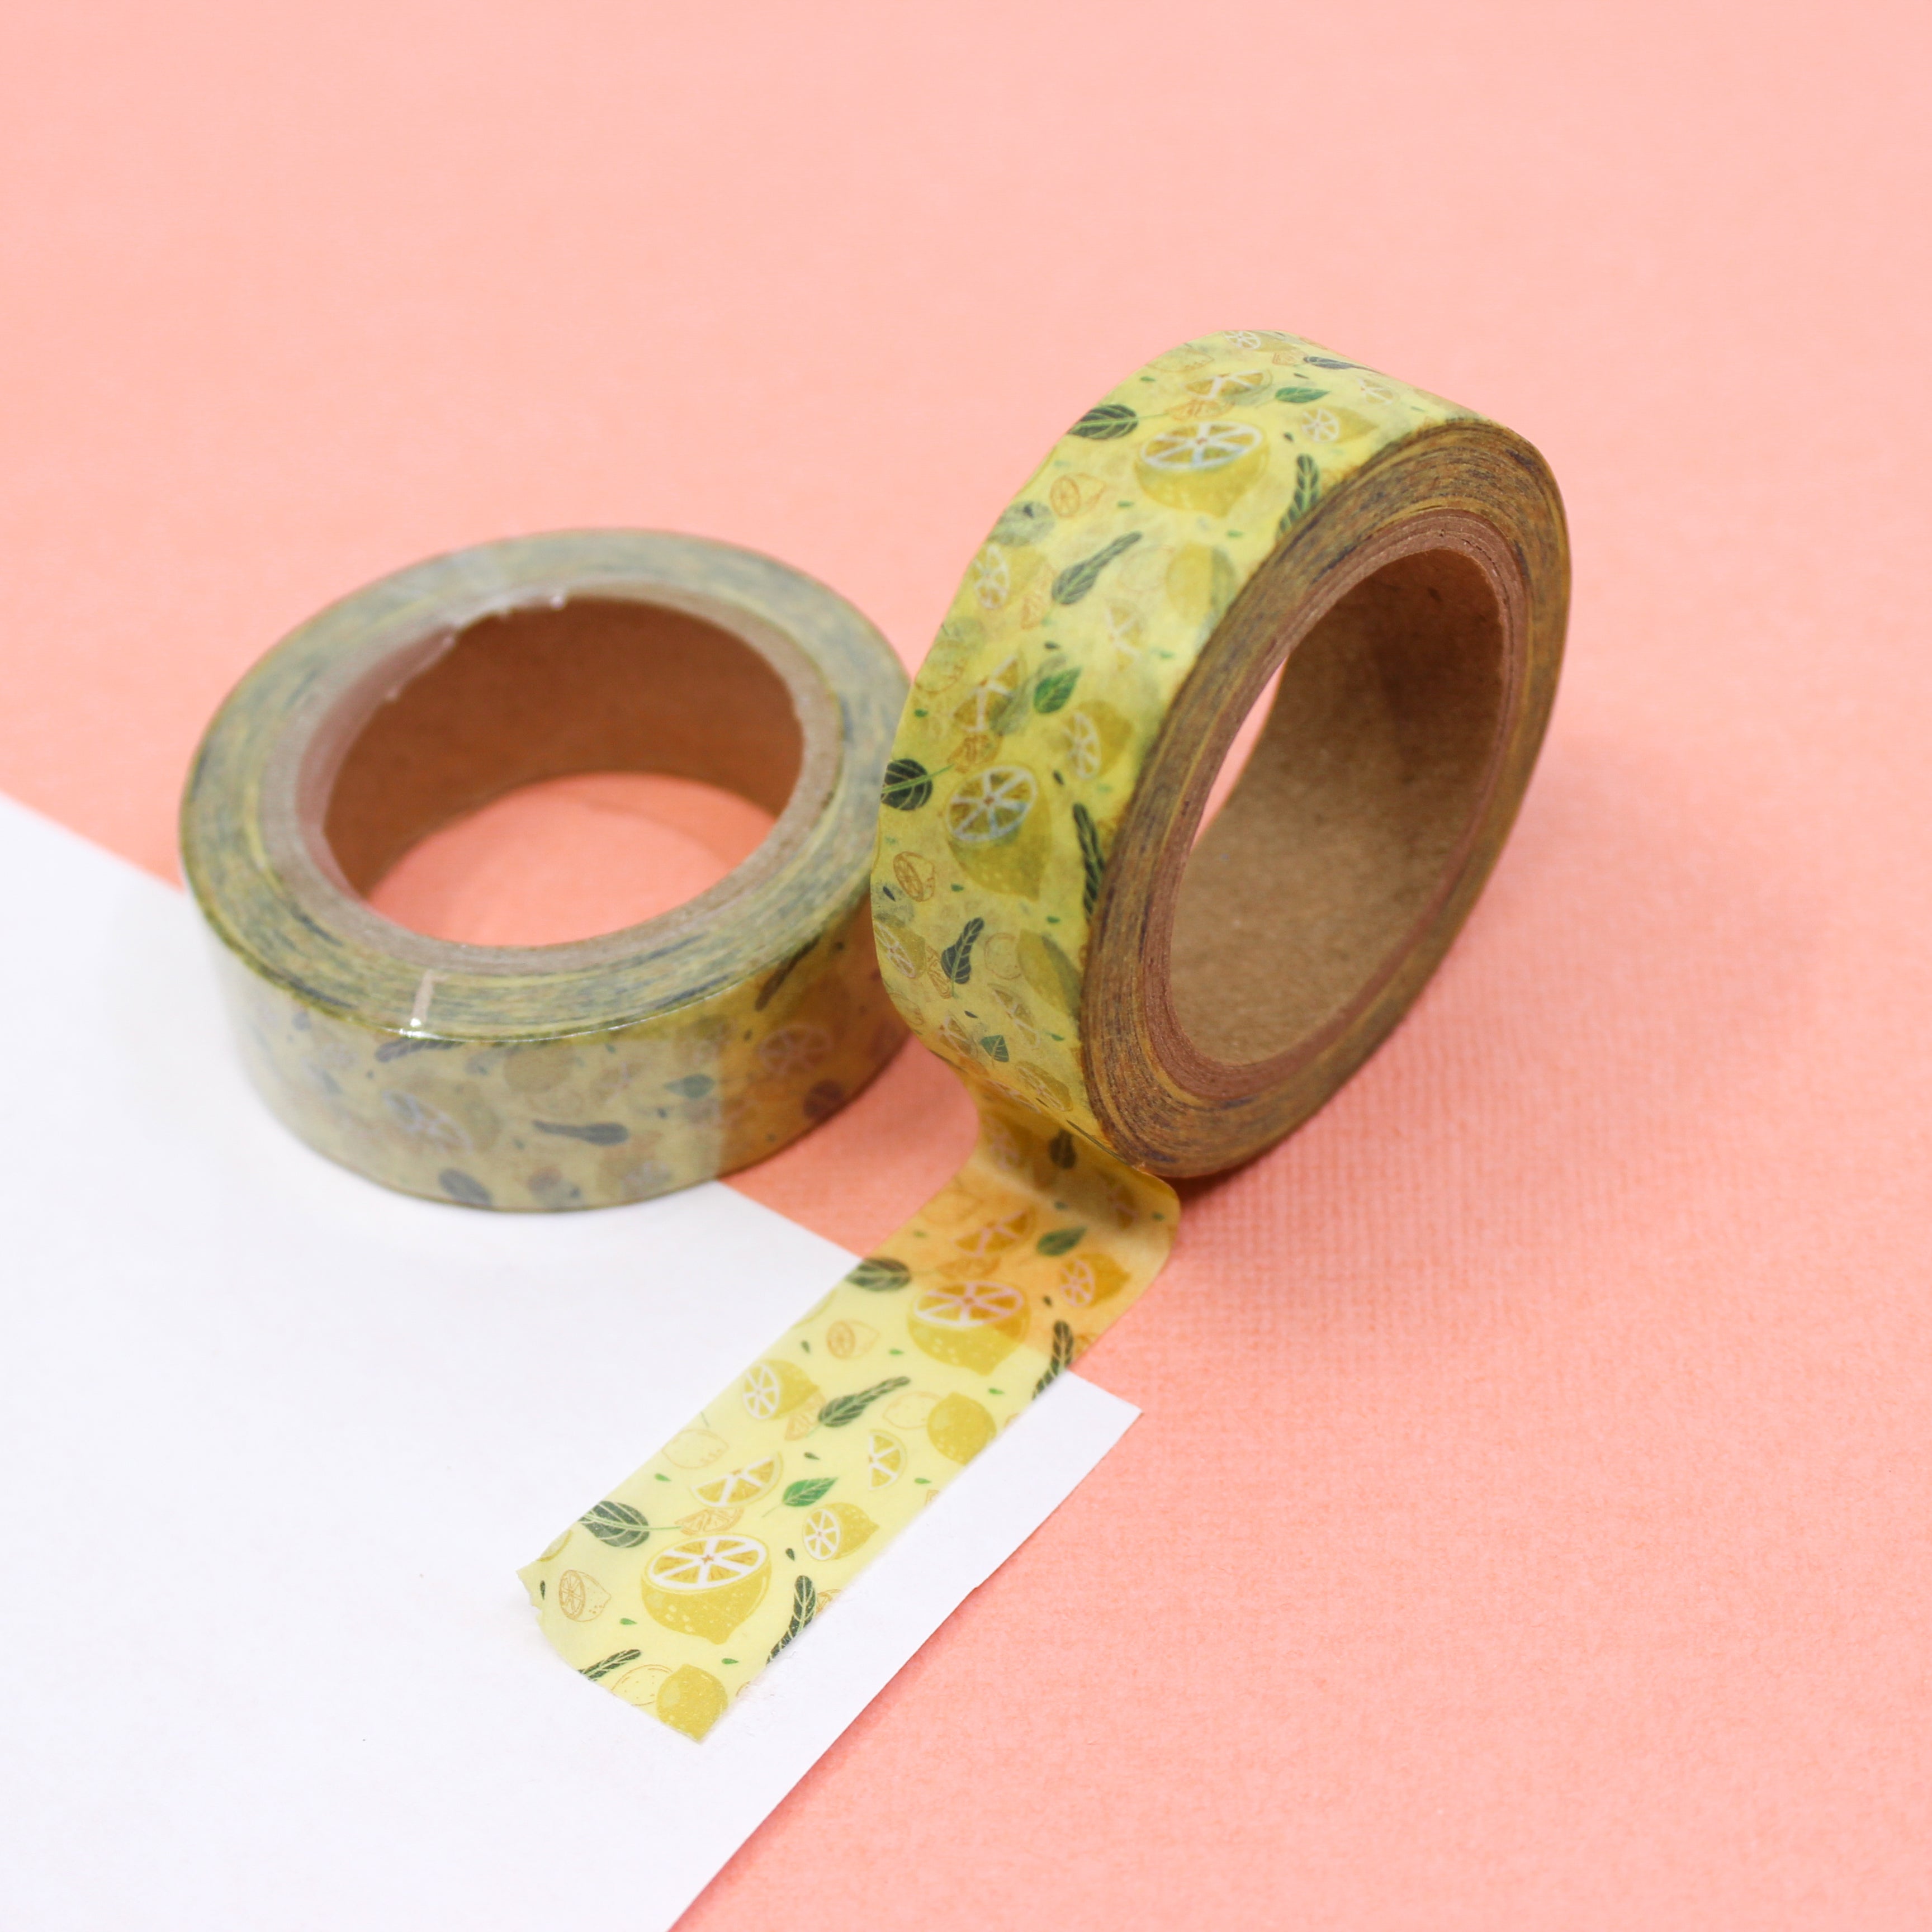 This is a yellow lemon themed washi tape from BBB Supplies Craft Shop